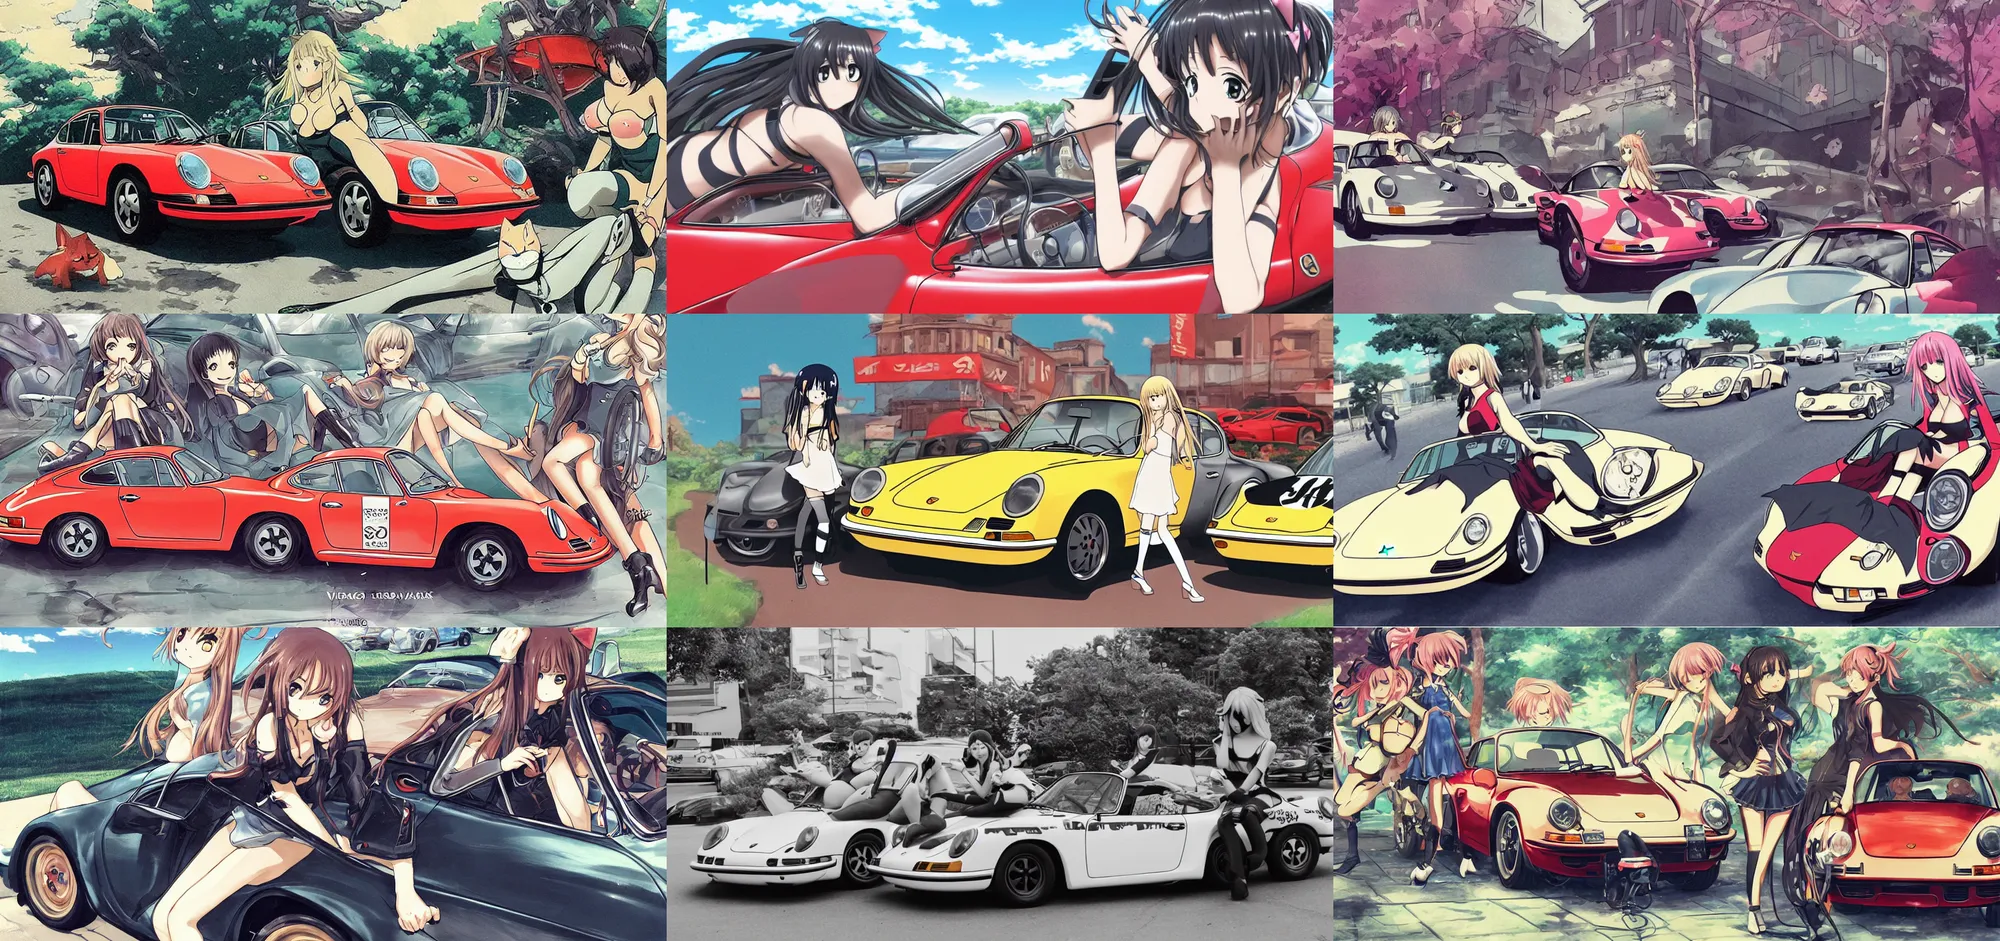 AsianCineFest: ACF 911: Two anime series from VIZ debut on multiple online  content outlets